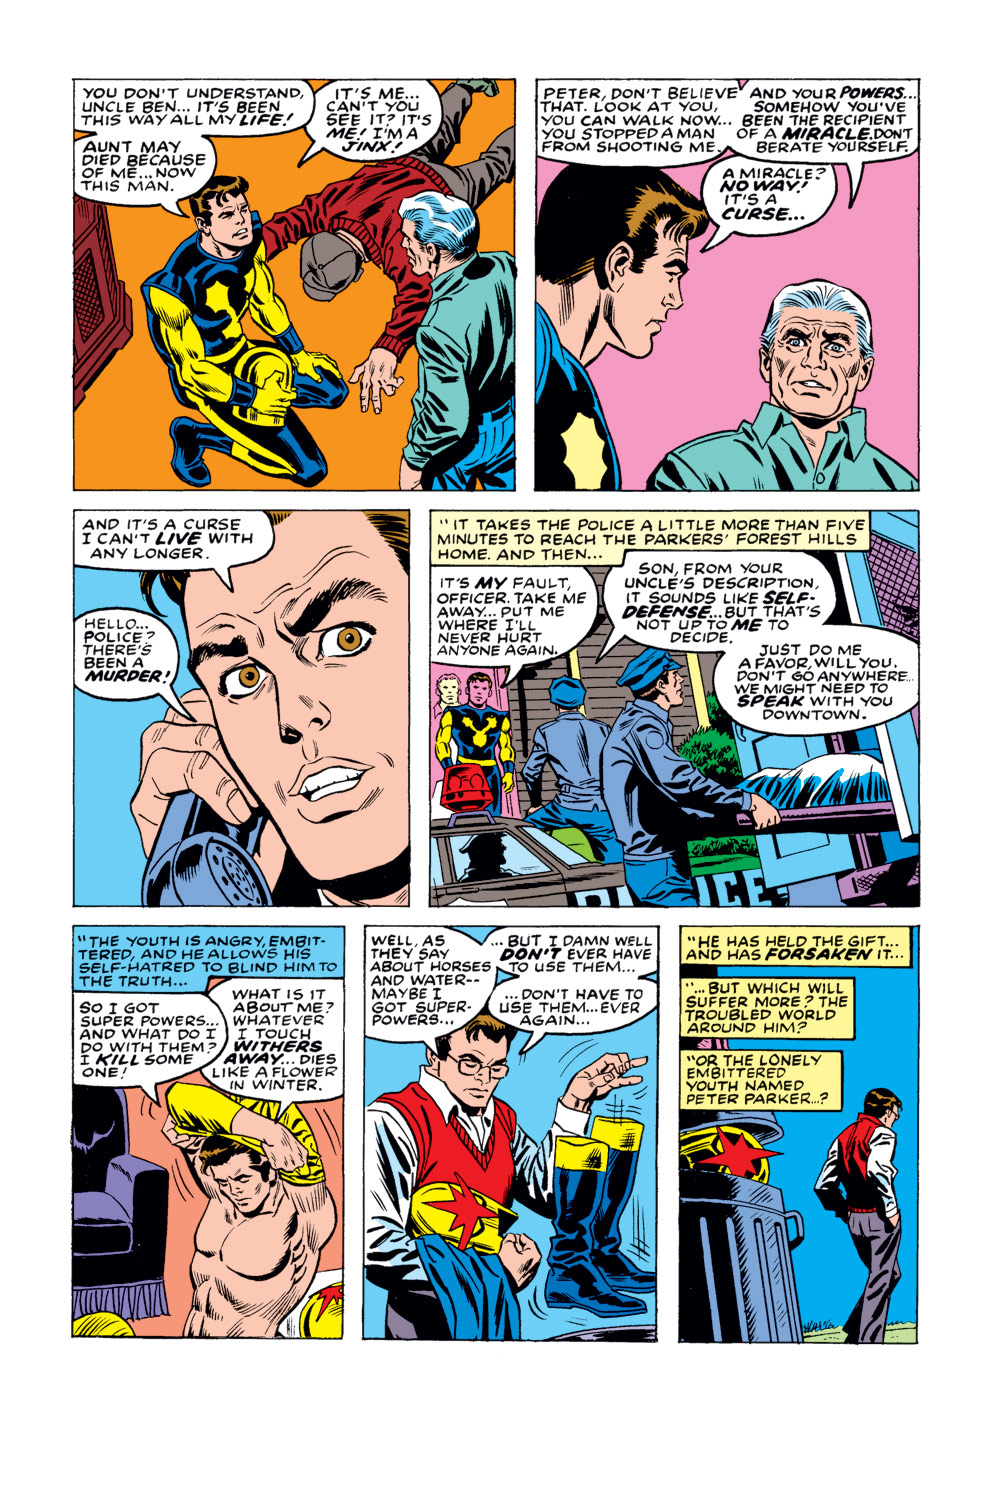 What If? (1977) issue 15 - Nova had been four other people - Page 27